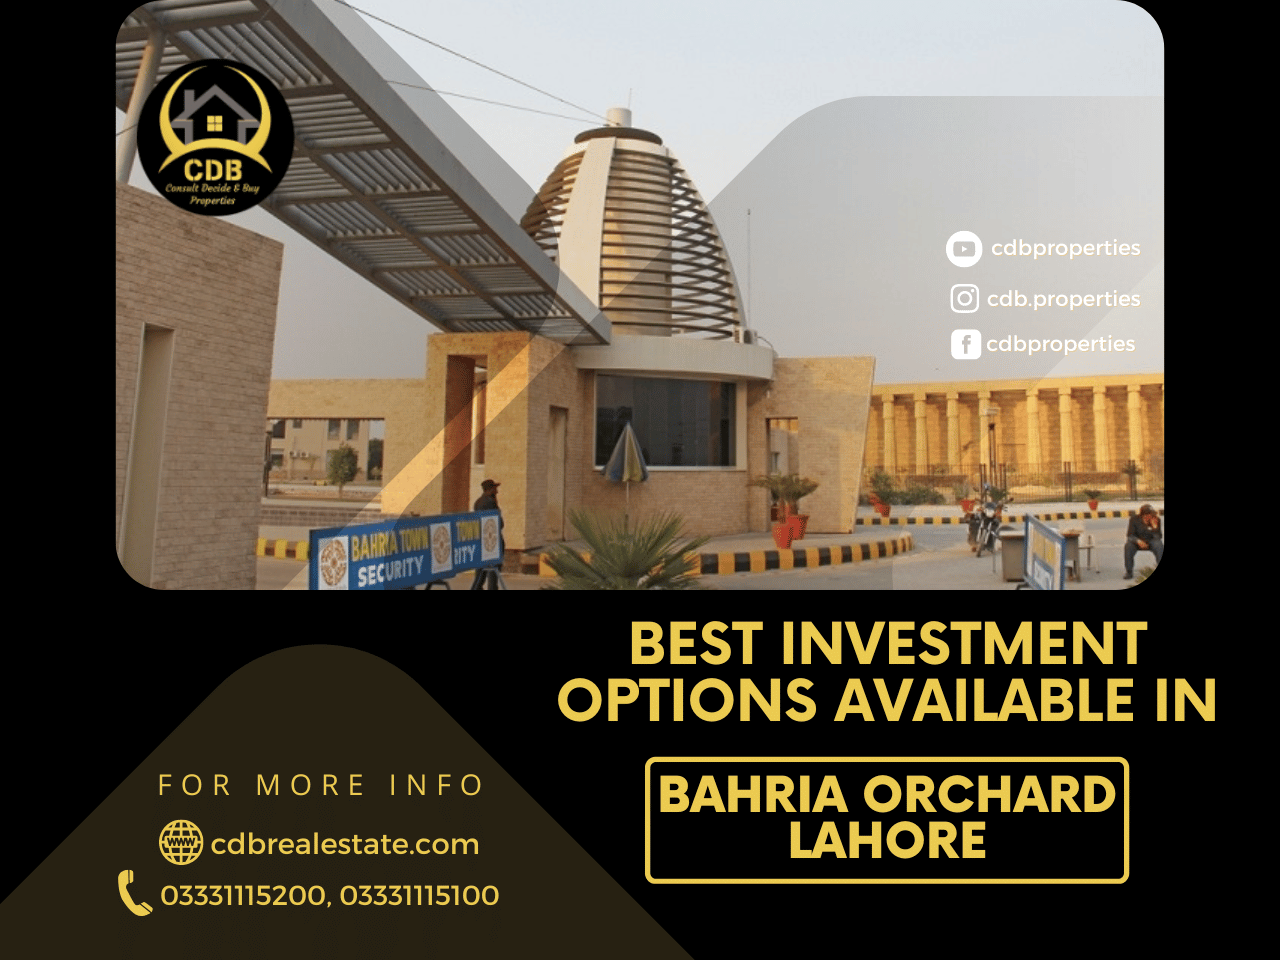 The Best Investment Options Available in Bahria Orchard Lahore